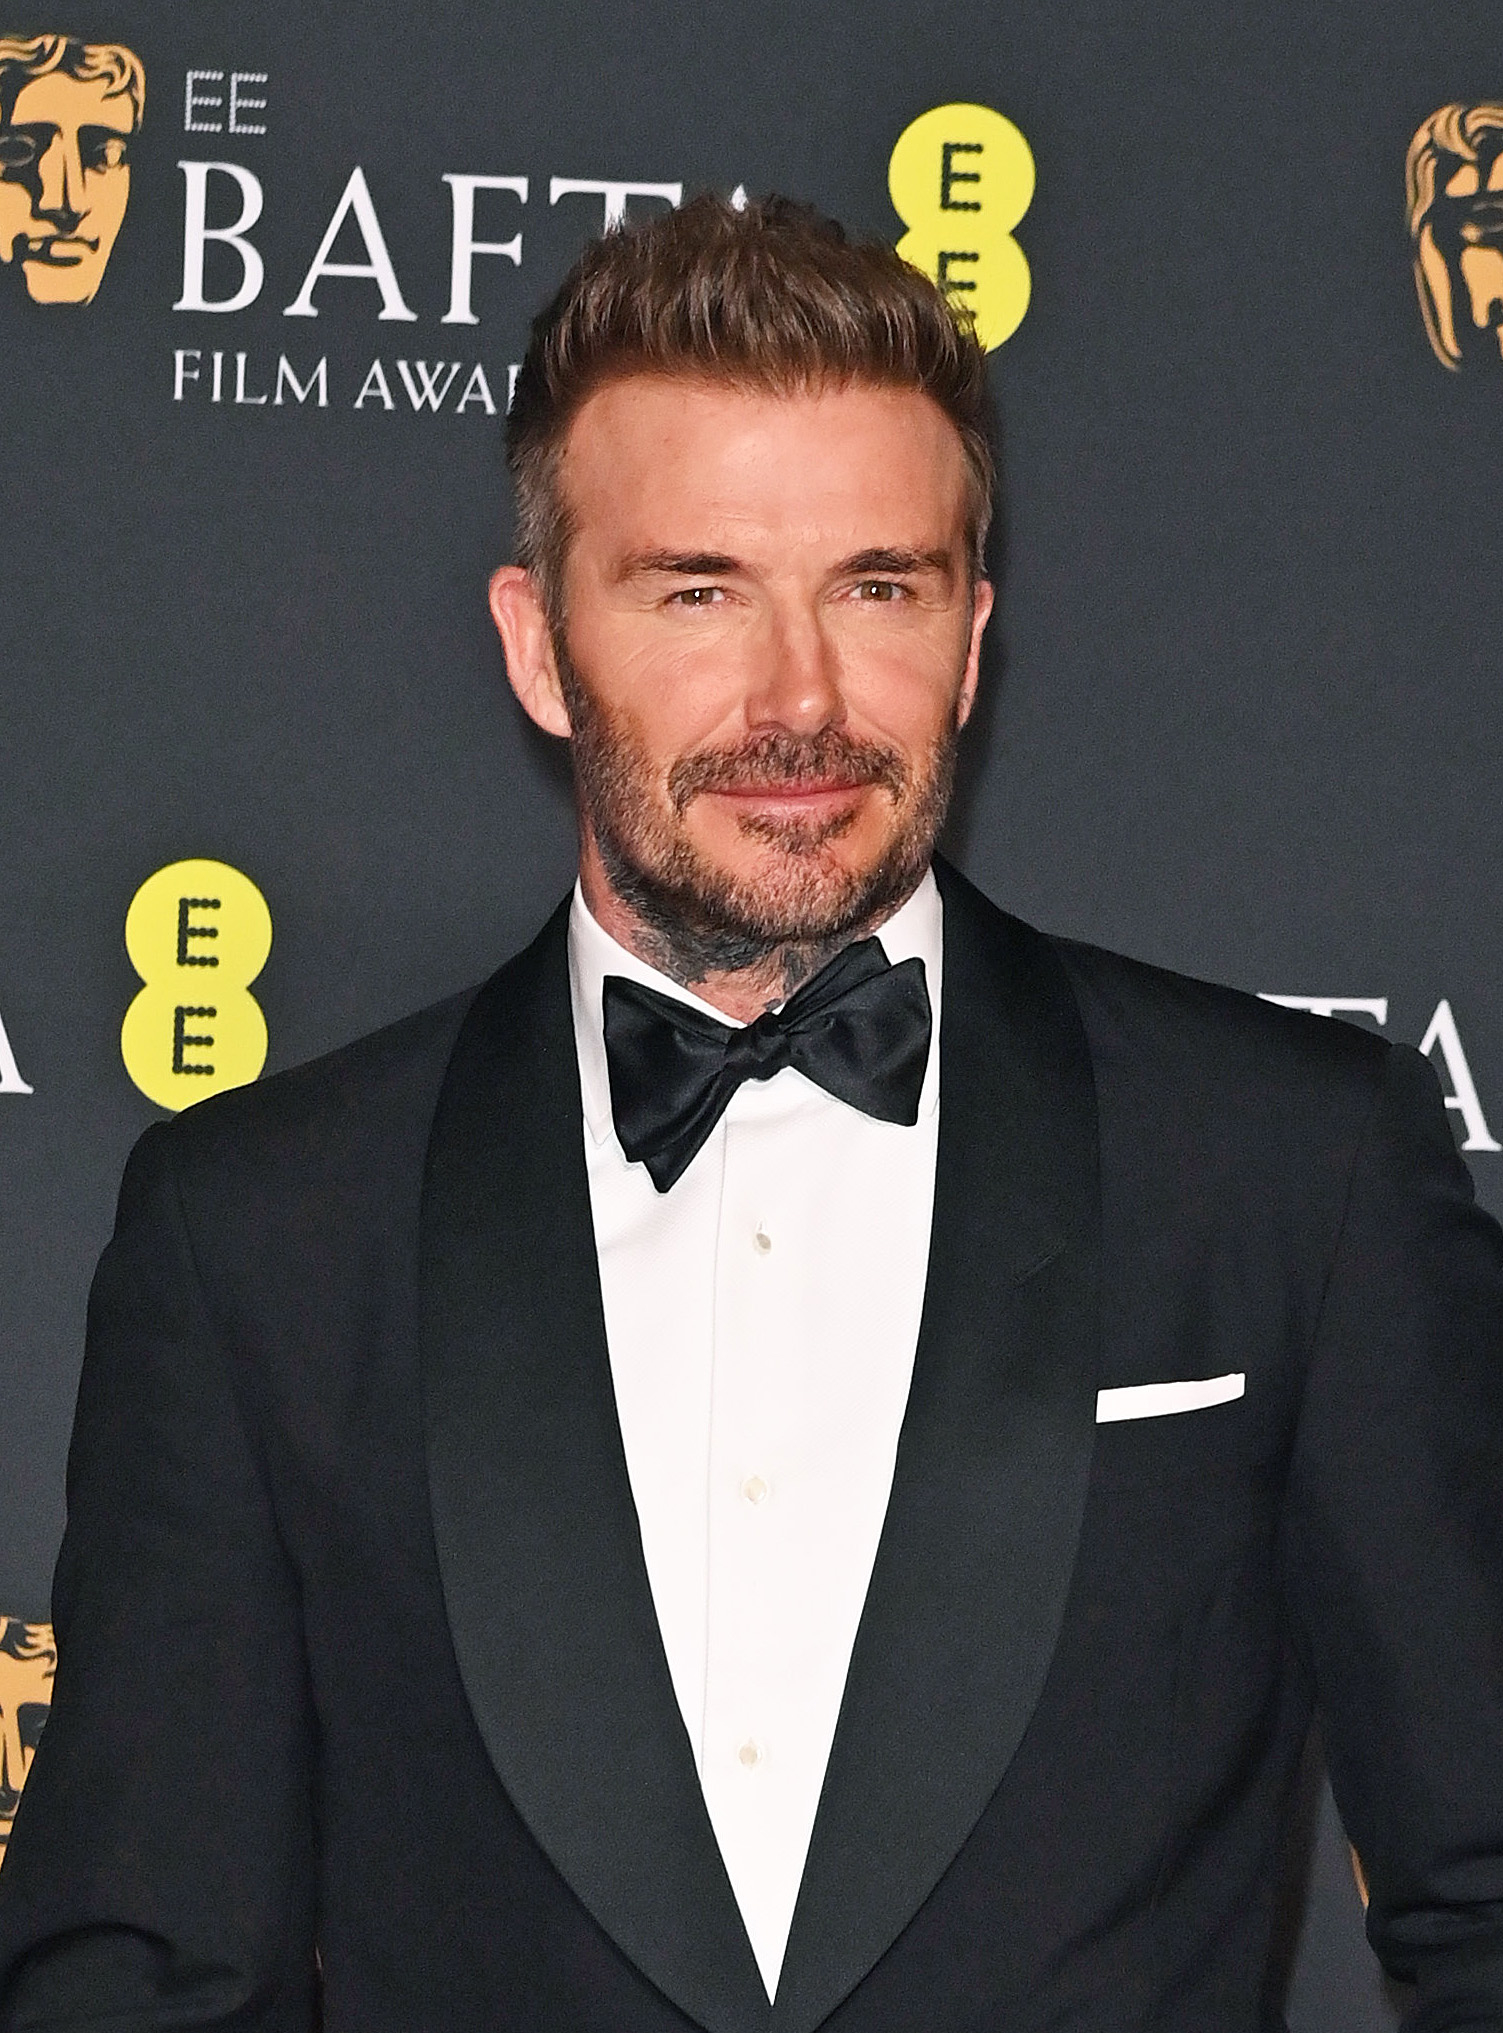 David Beckham in a black tuxedo with a bow tie at the BAFTA Awards